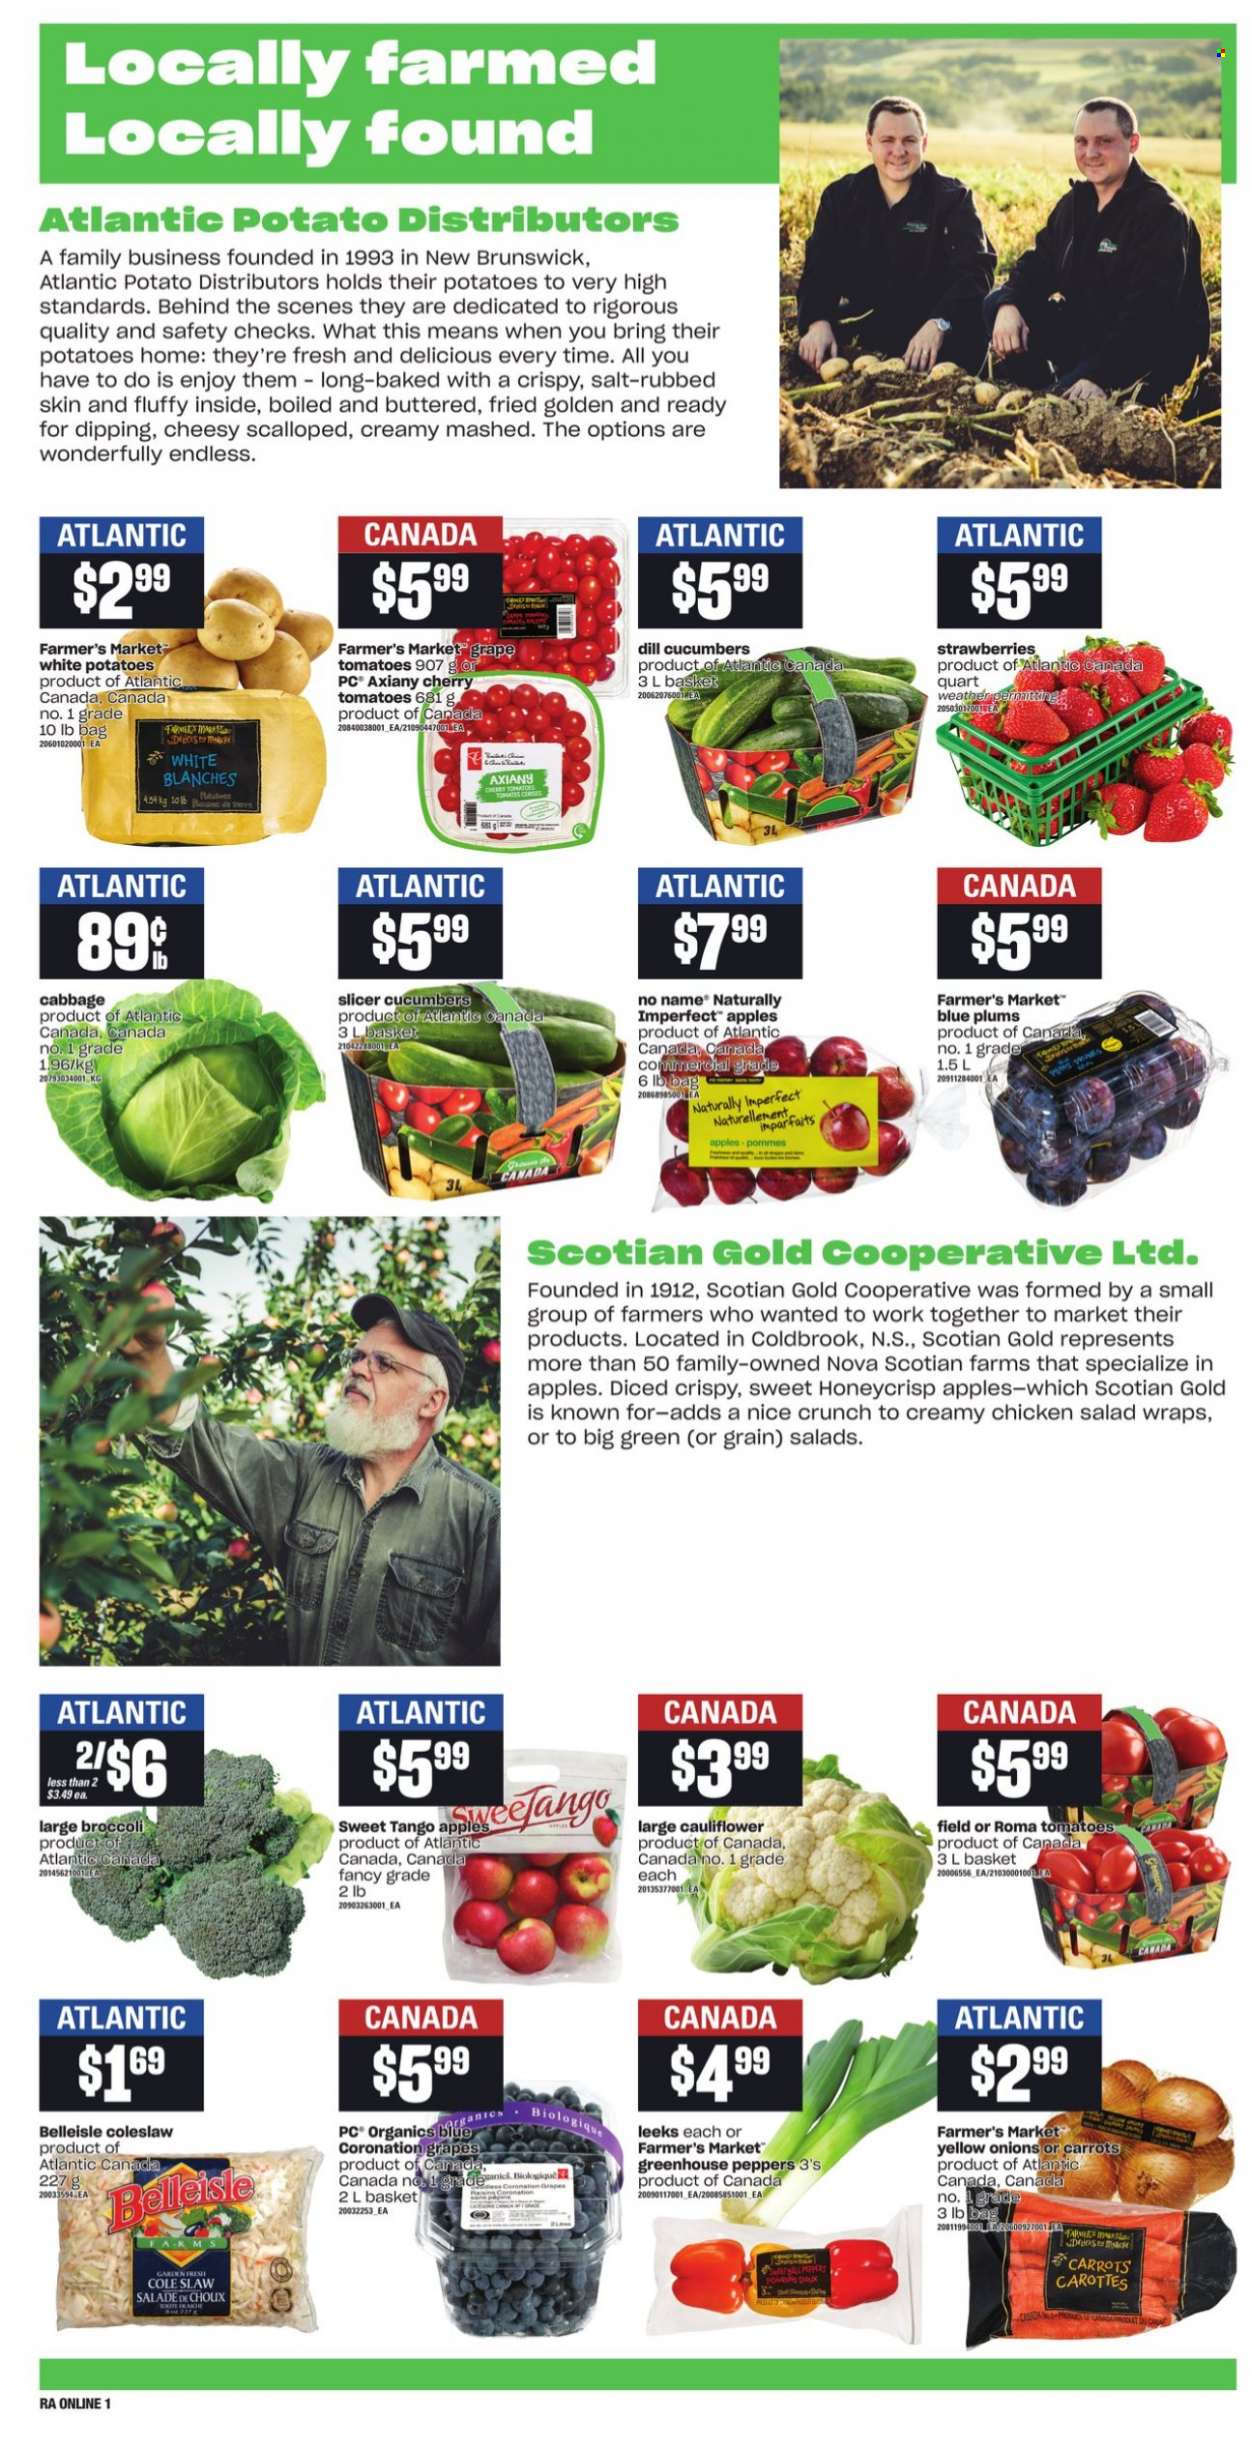 thumbnail - Atlantic Superstore Flyer - September 16, 2021 - September 22, 2021 - Sales products - wraps, broccoli, cabbage, carrots, cauliflower, cucumber, tomatoes, potatoes, onion, salad, peppers, apples, strawberries, plums, cherries, No Name, coleslaw, chicken salad, salt, dill. Page 4.